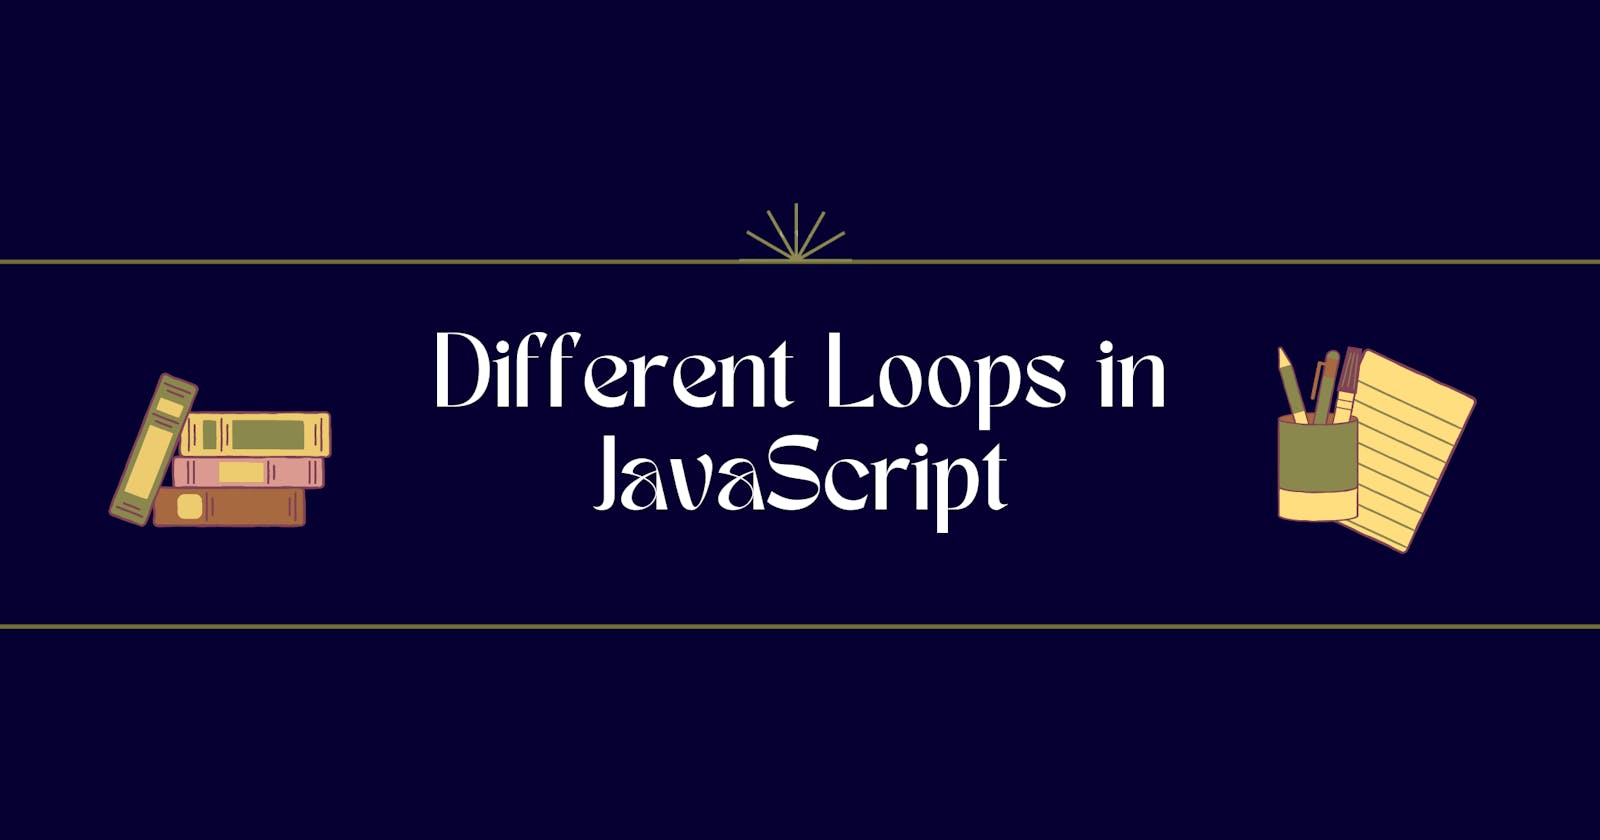 Different Loops in JavaScript